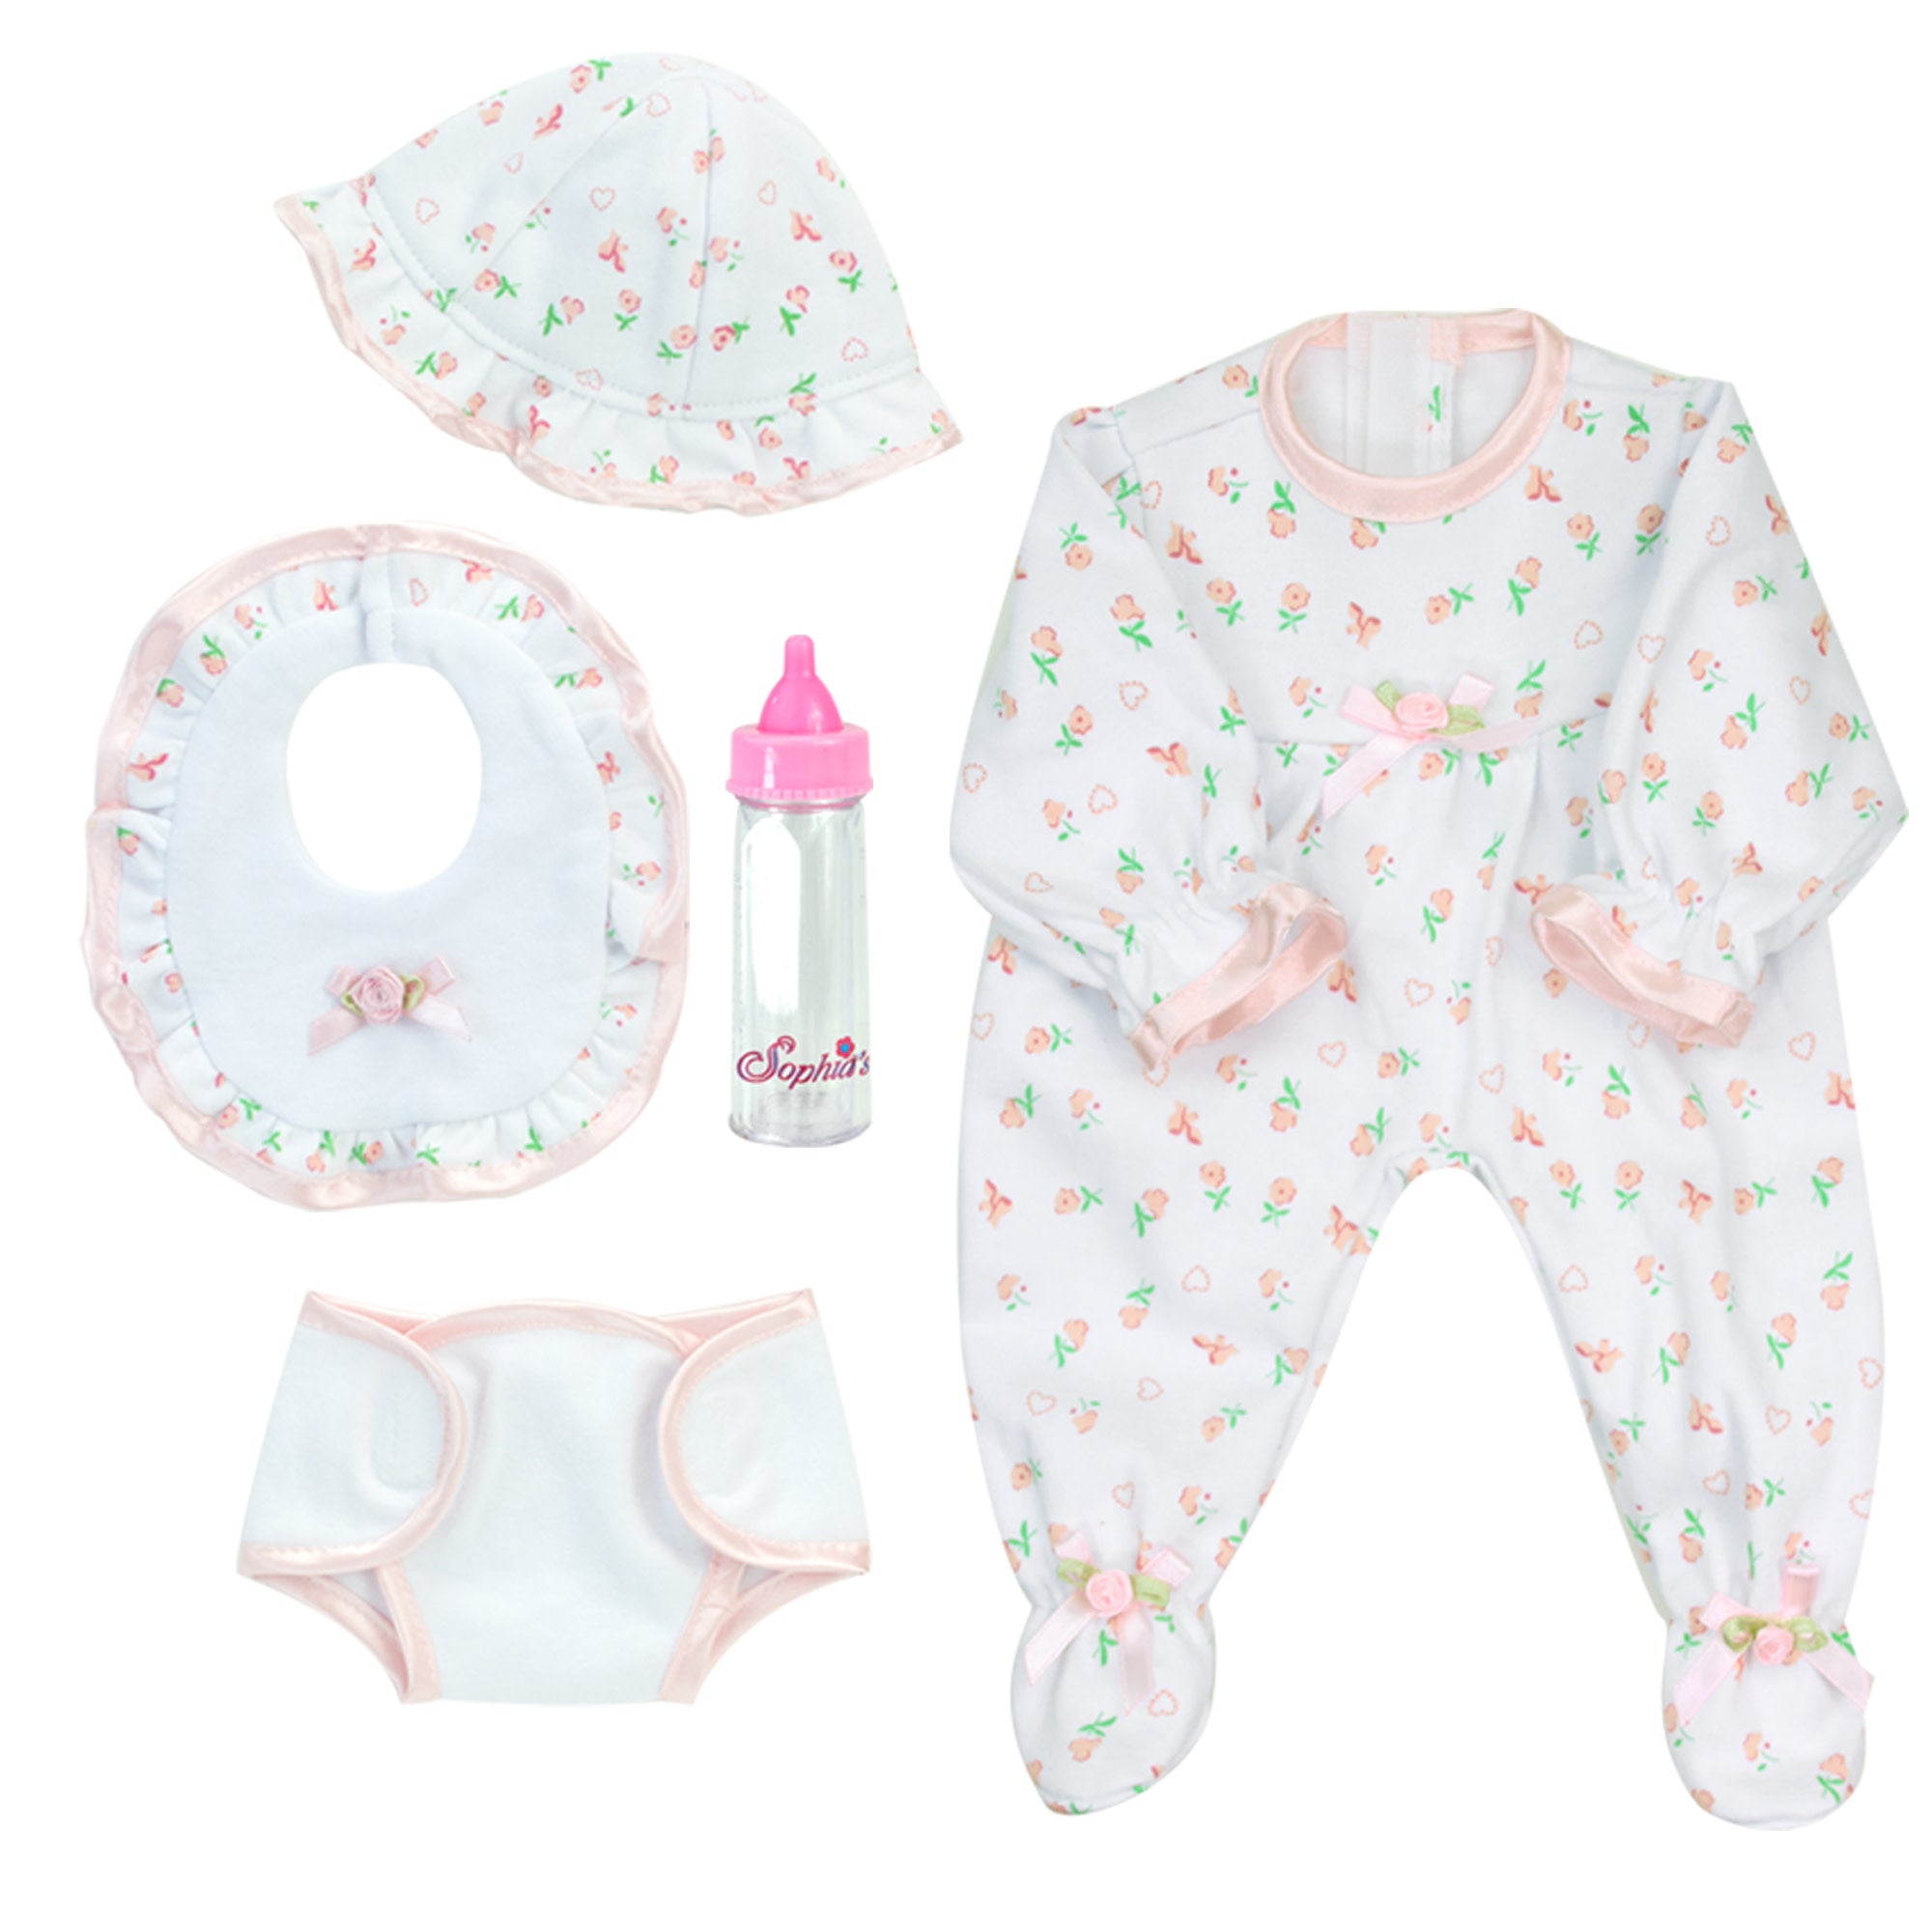 Sophia's 5 Piece Floral Print Baby Doll and Bottle Set for 15'' Dolls, White/Pink